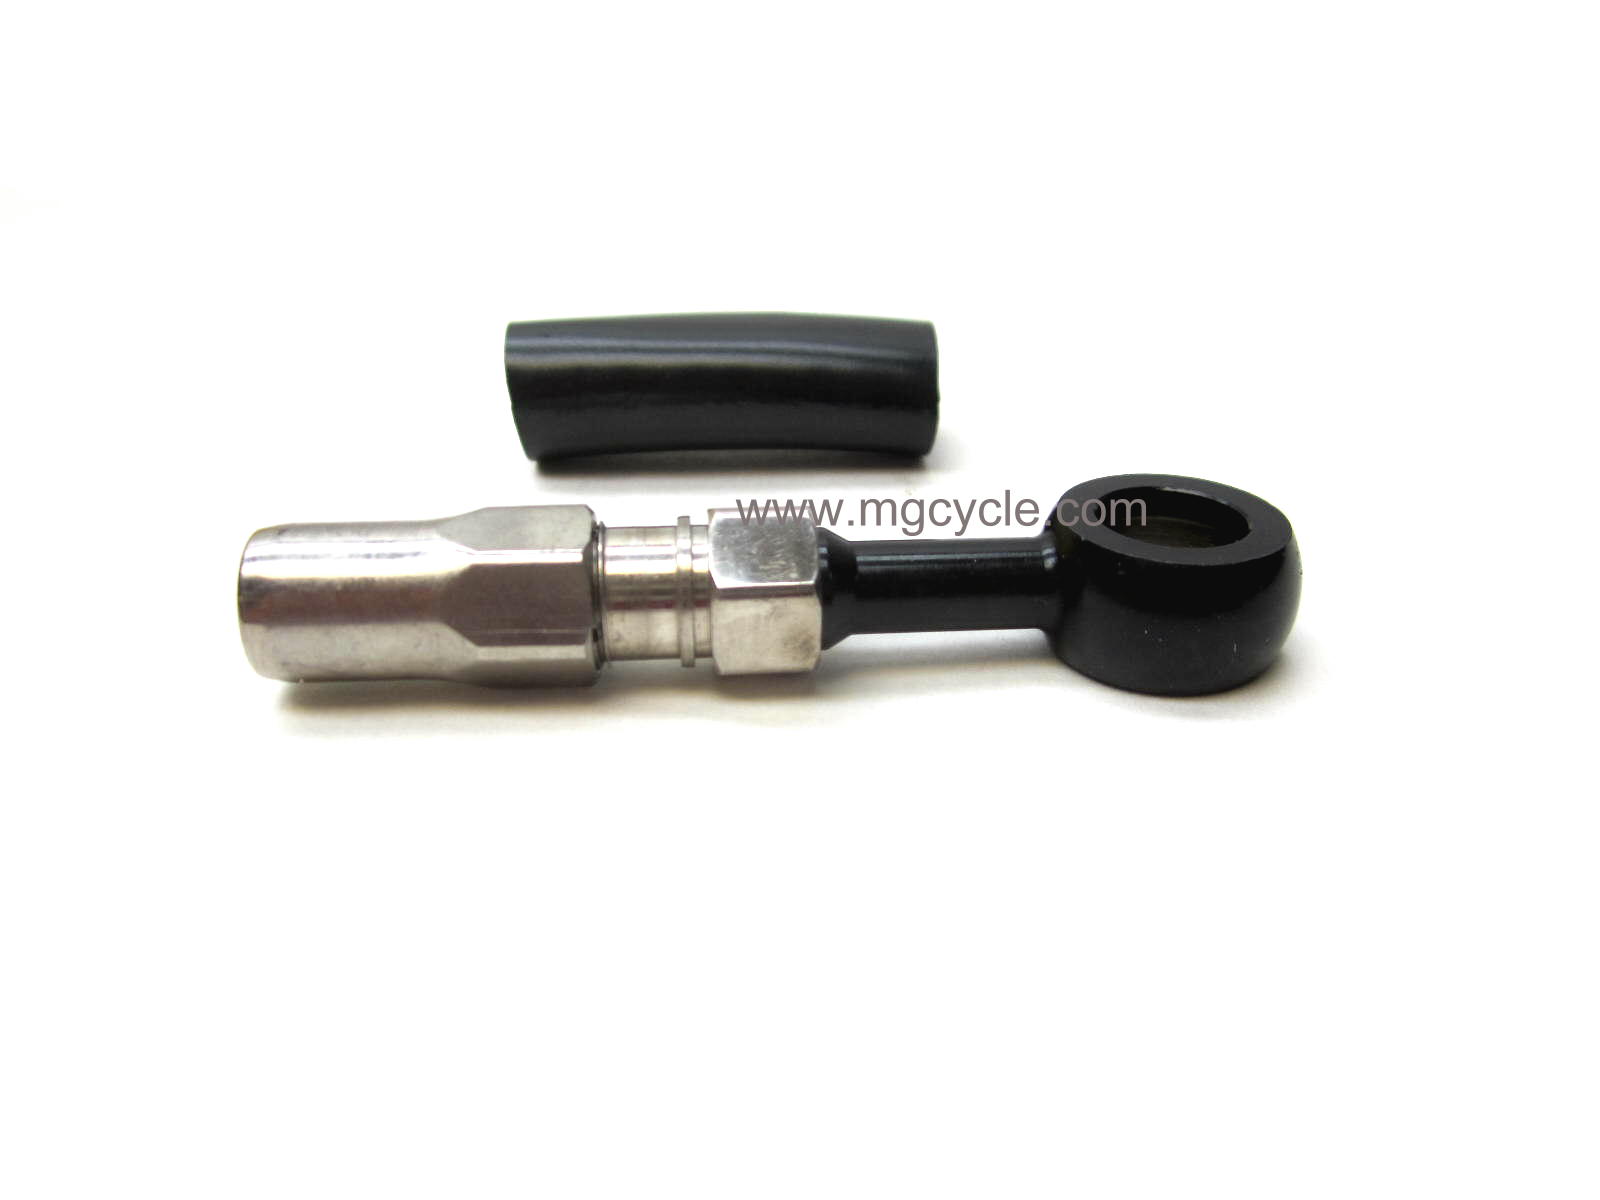 17420322 - $15.26 - Black Magnum BYO brake banjo fitting 90 degrees 10mm  [17420322] : MG Cycle, Moto Guzzi Parts and Accessories available online at  MGCycle.com